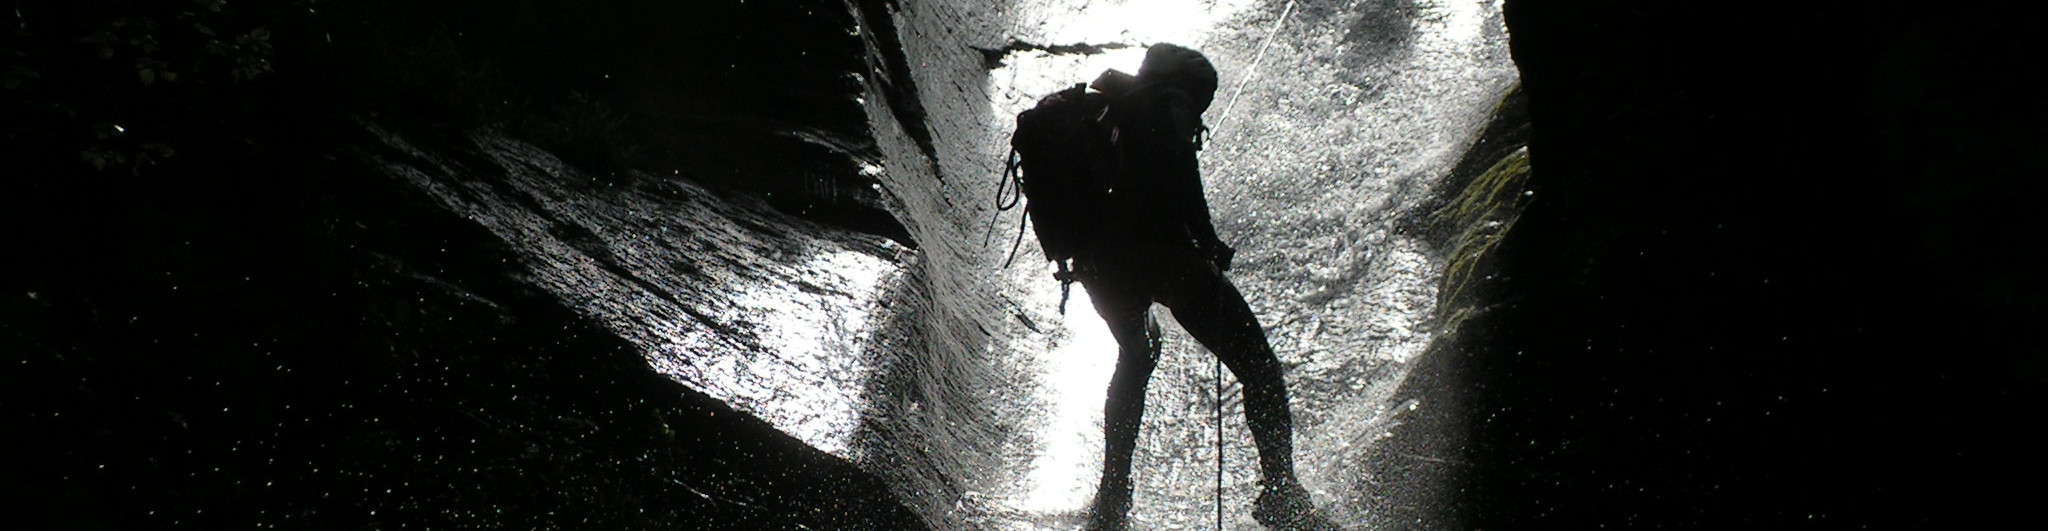 , Safety and Equipment, Canyoning Valle d&#039;Aosta